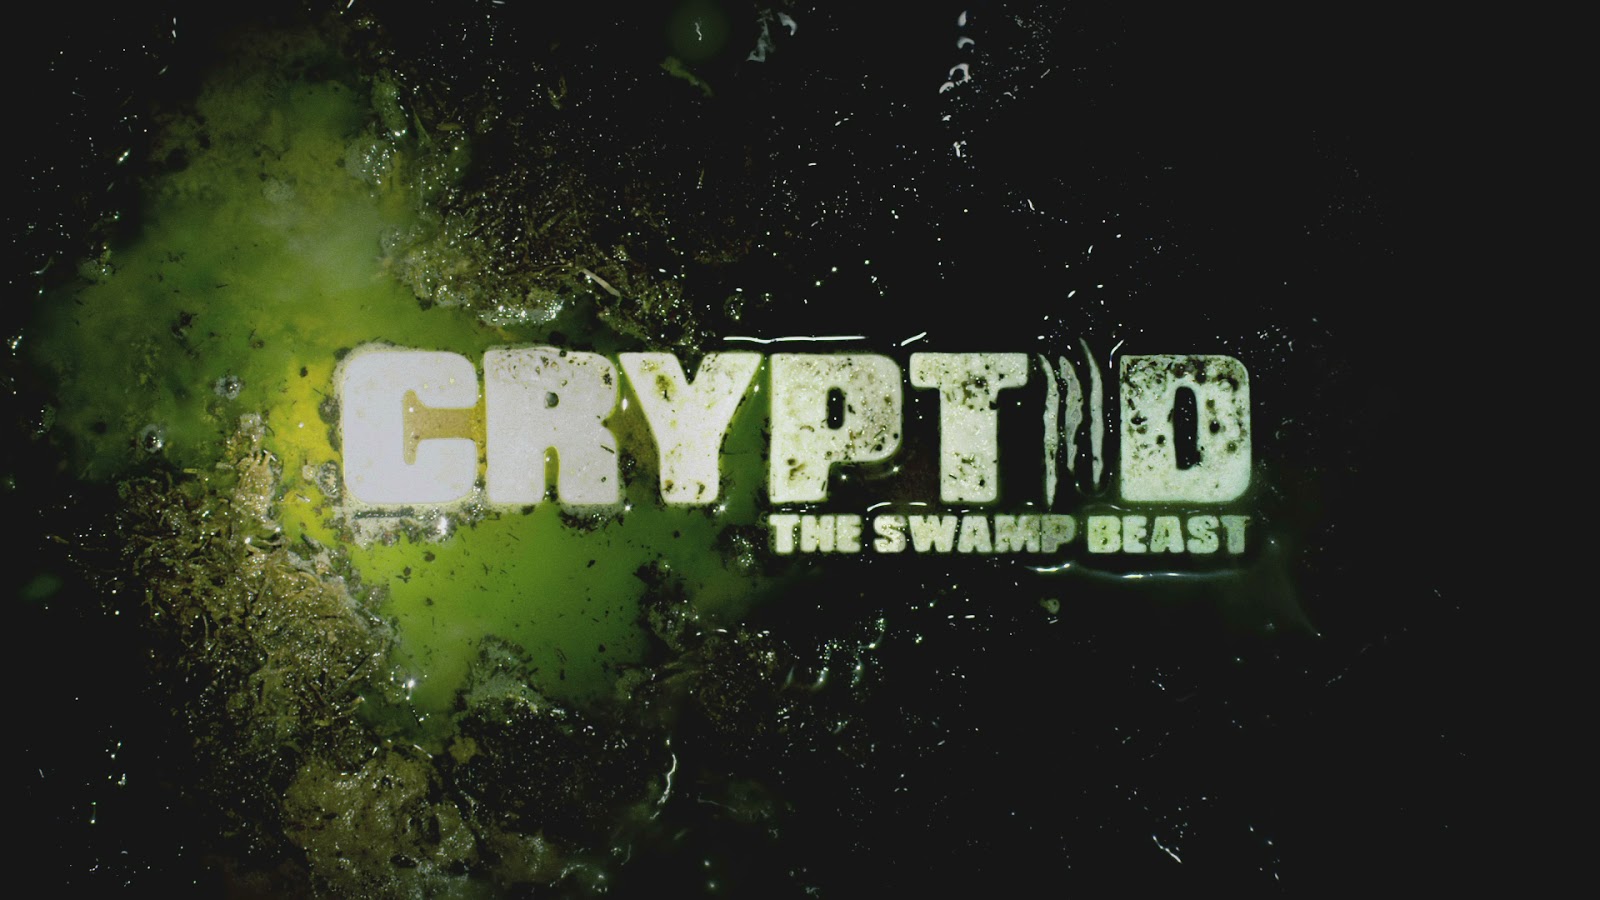 The History Channel's CRYPTID: THE SWAMP BEAST